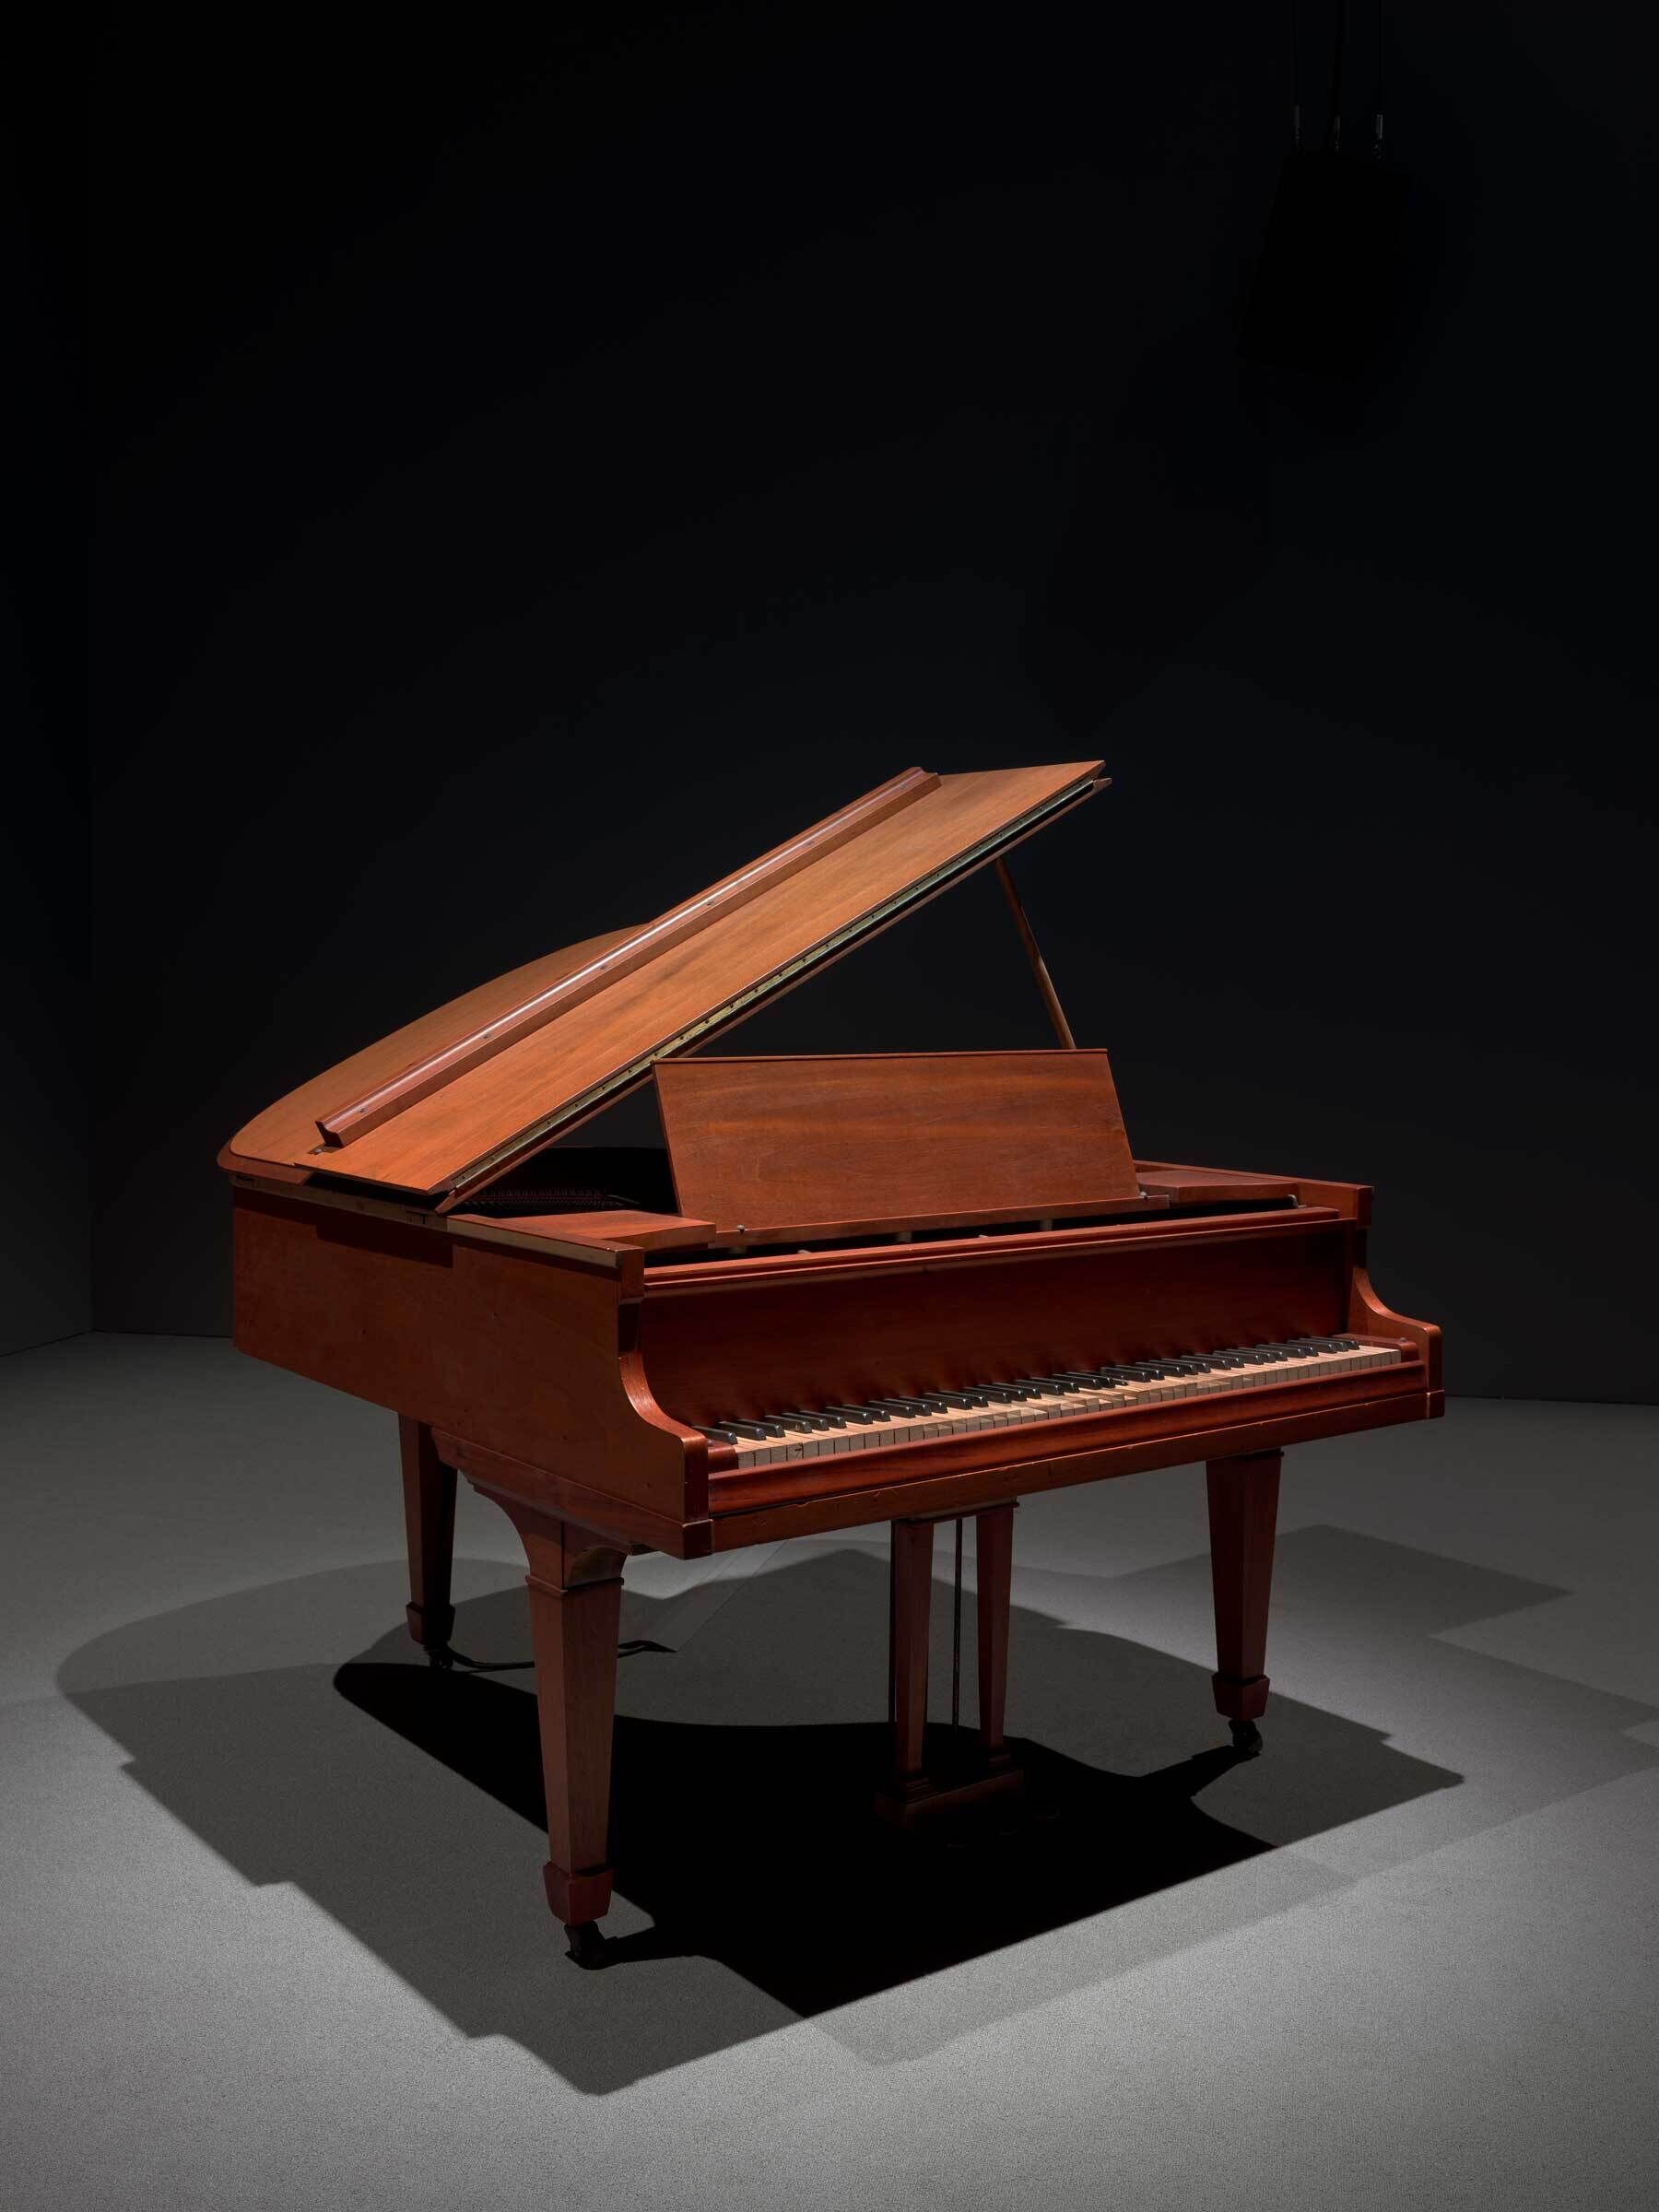 A grand piano with its lid open, set against a dark background with soft lighting.